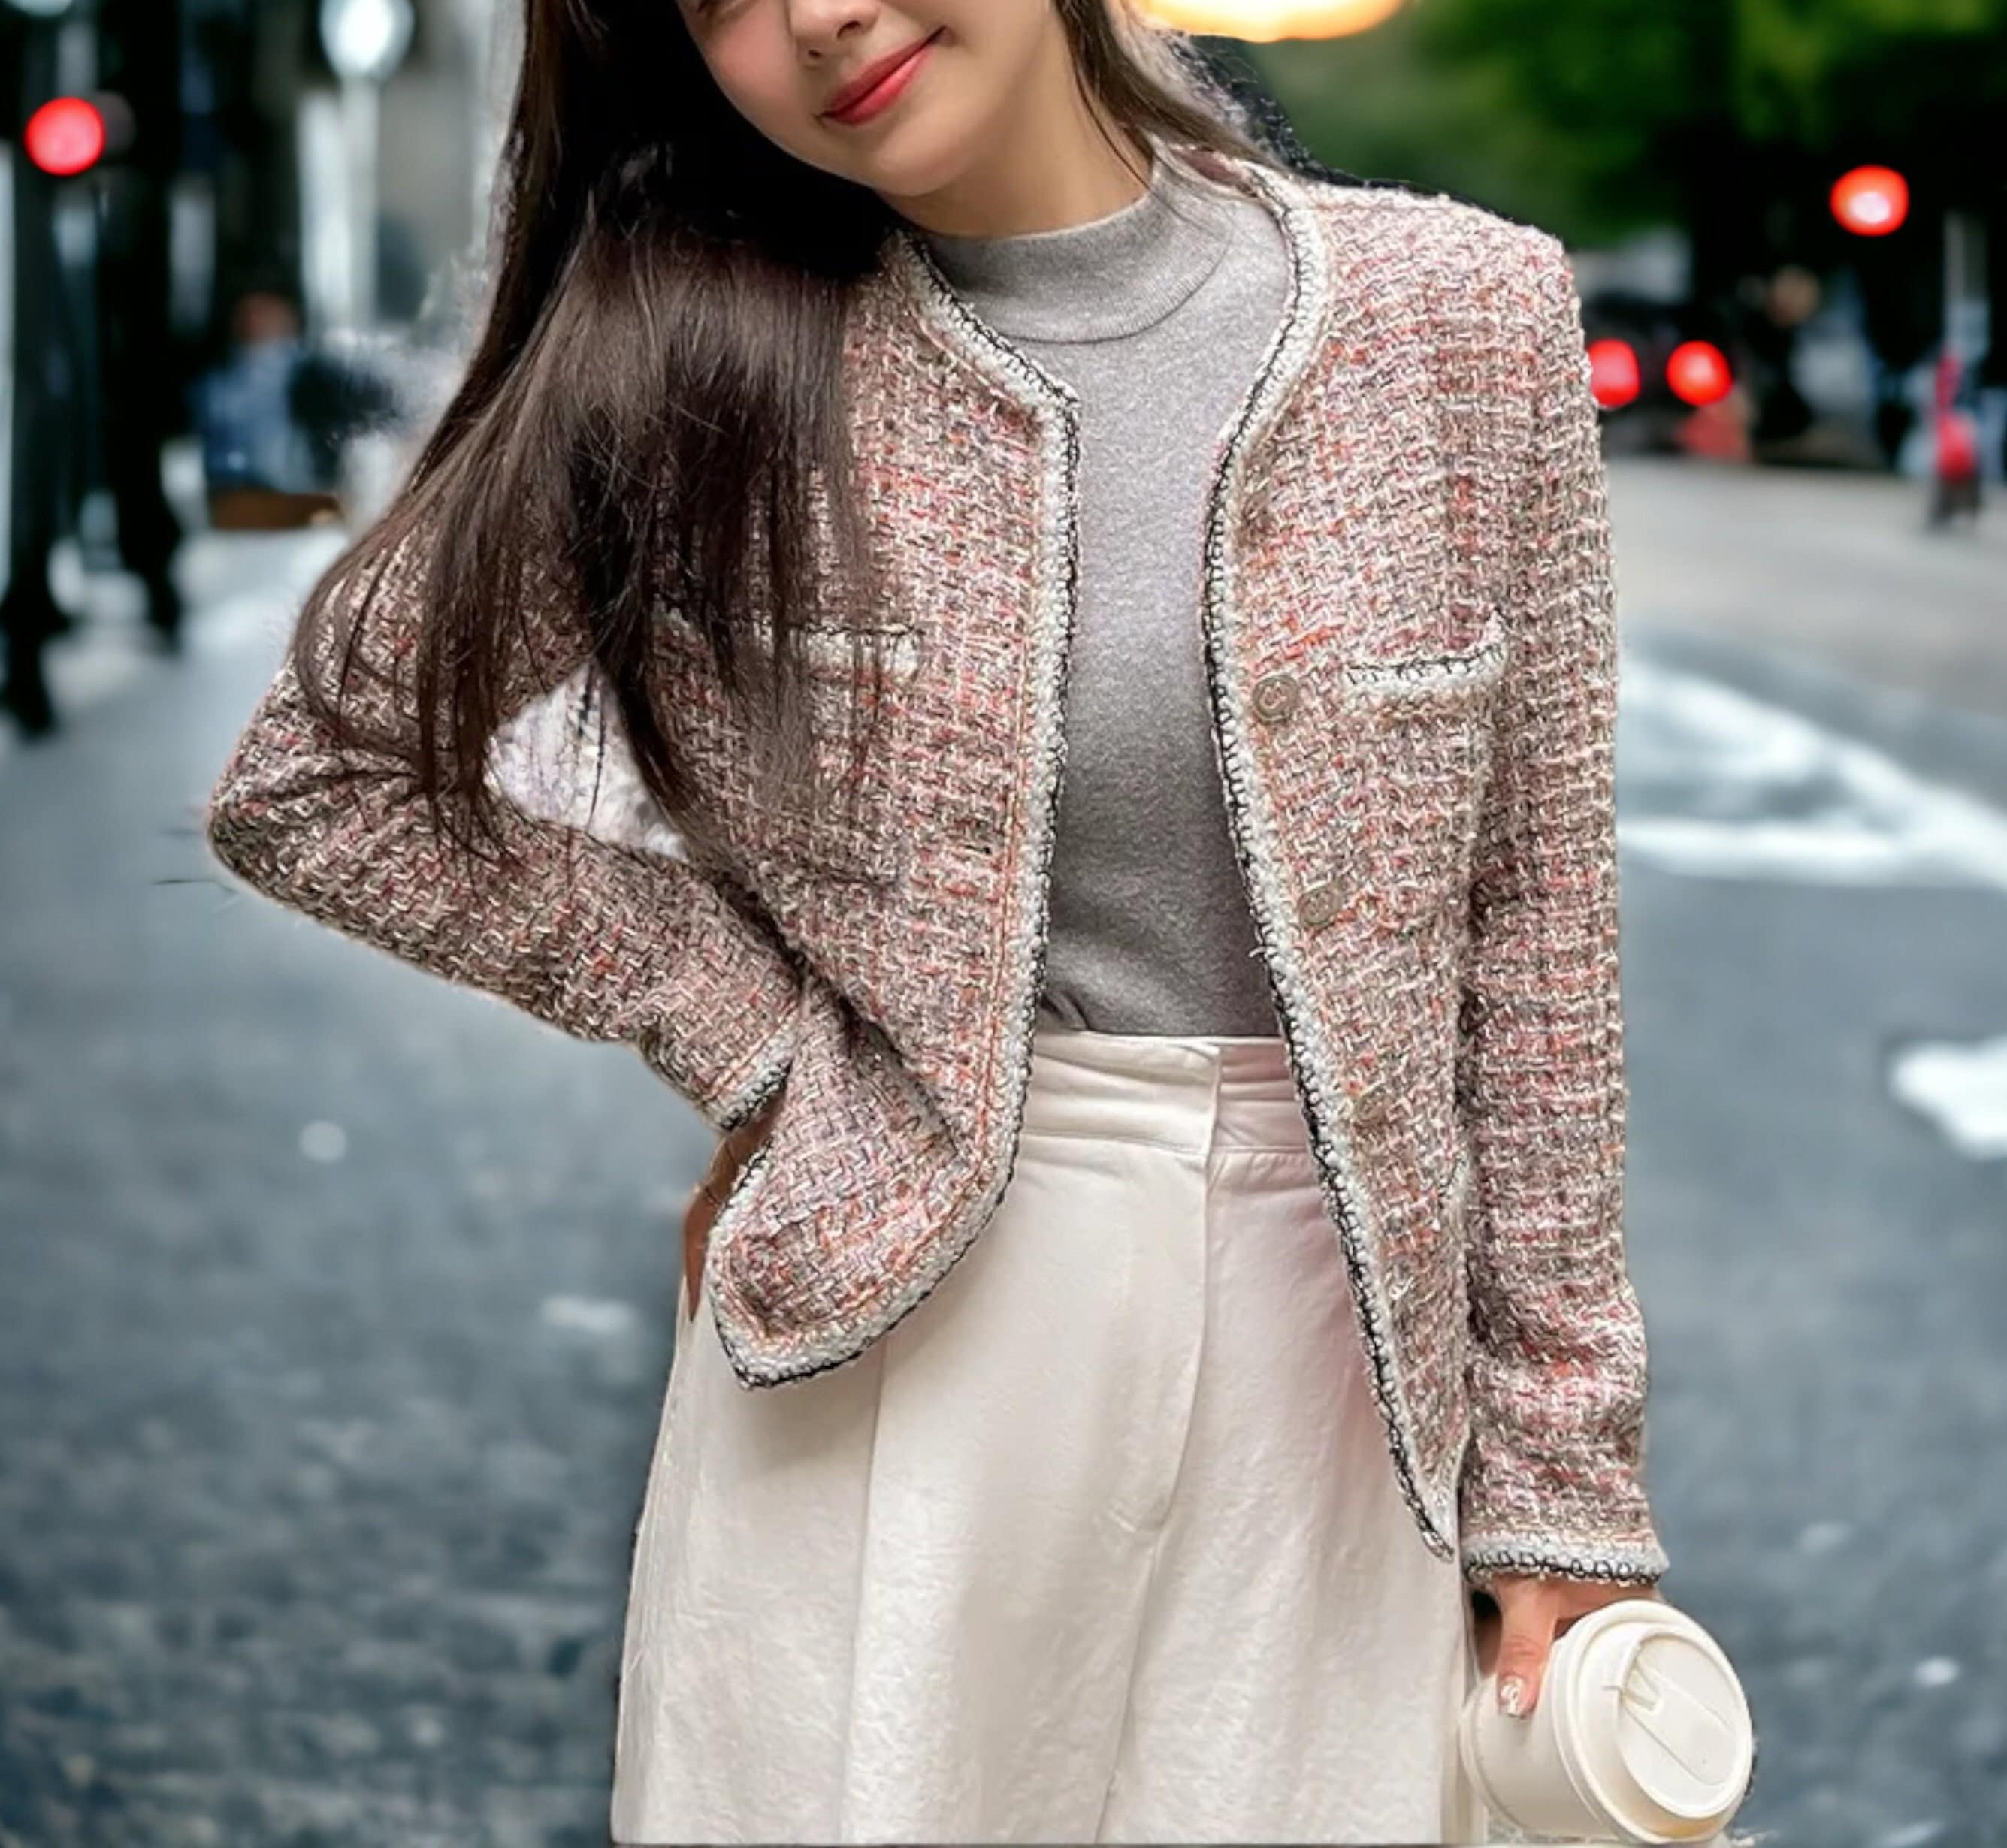 Classic Ivory tweed Chanel suit  Tweed suit women, Chanel street style,  Dressy casual